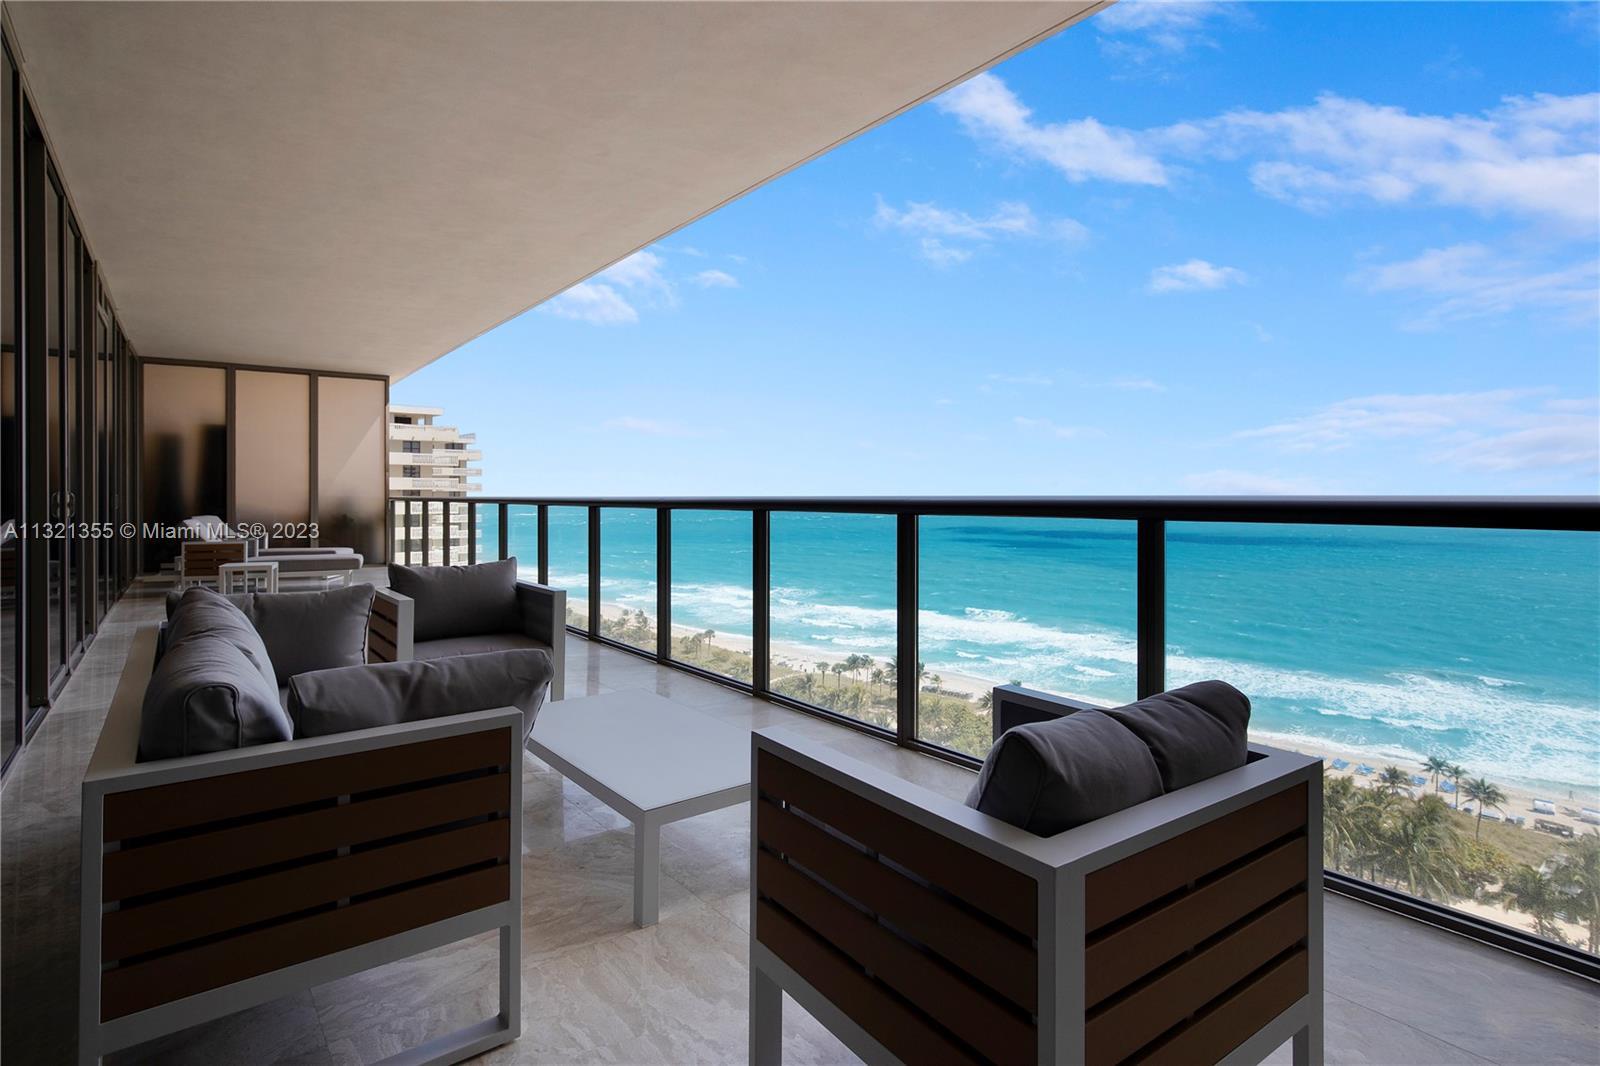 Immaculate oceanfront residence at the iconic St. Regis Bal Harbour. No expense was spared. This bea